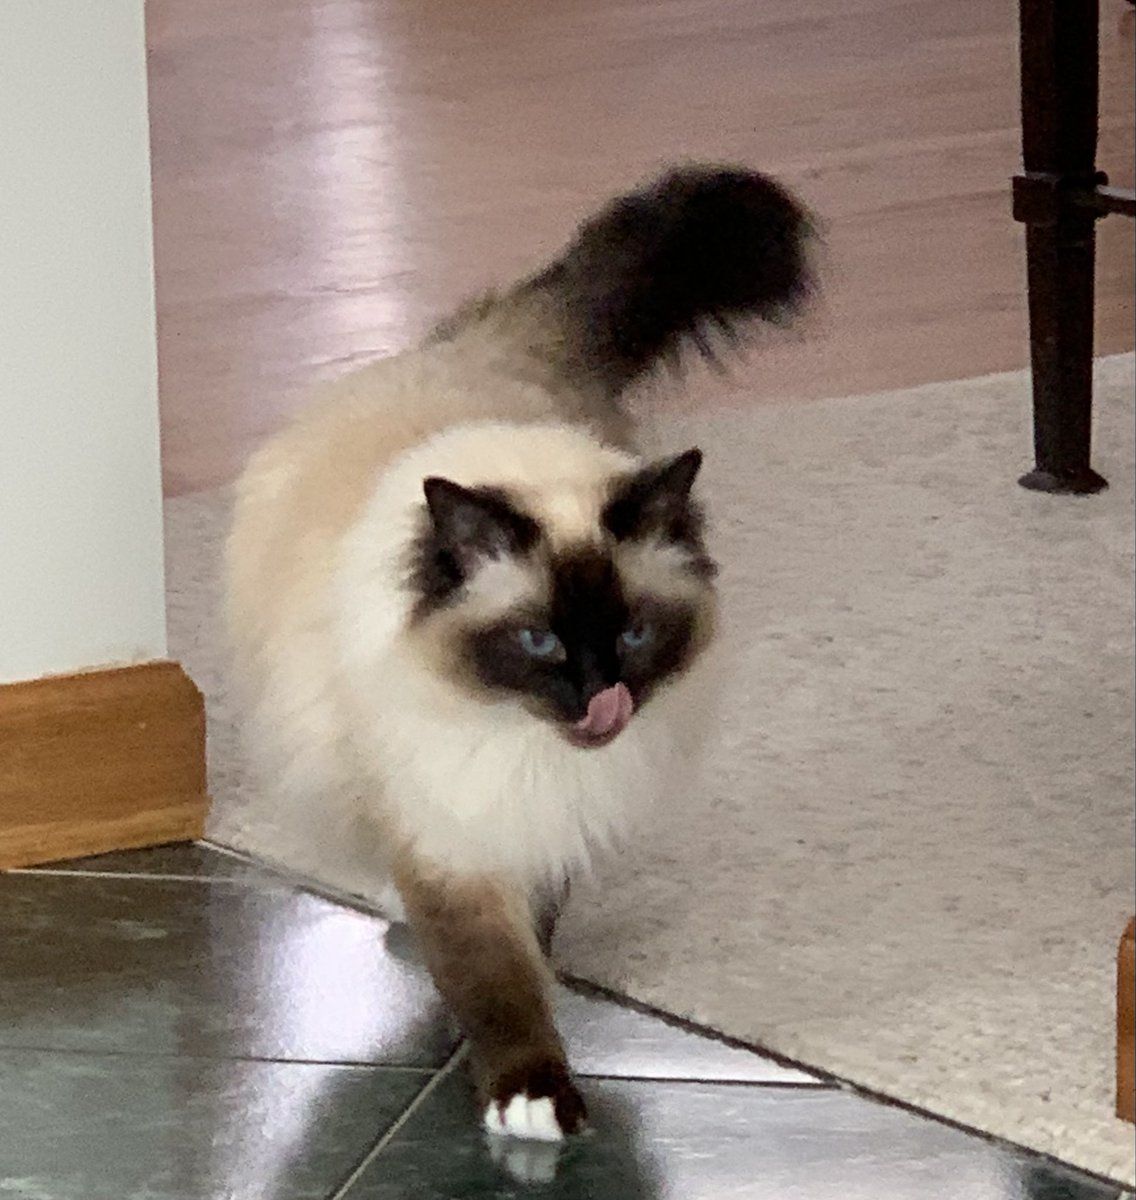 I really like Mama’s house guests - they found the treats #tongueouttuesday ♥️💋Cali💋♥️ #CatsOfX